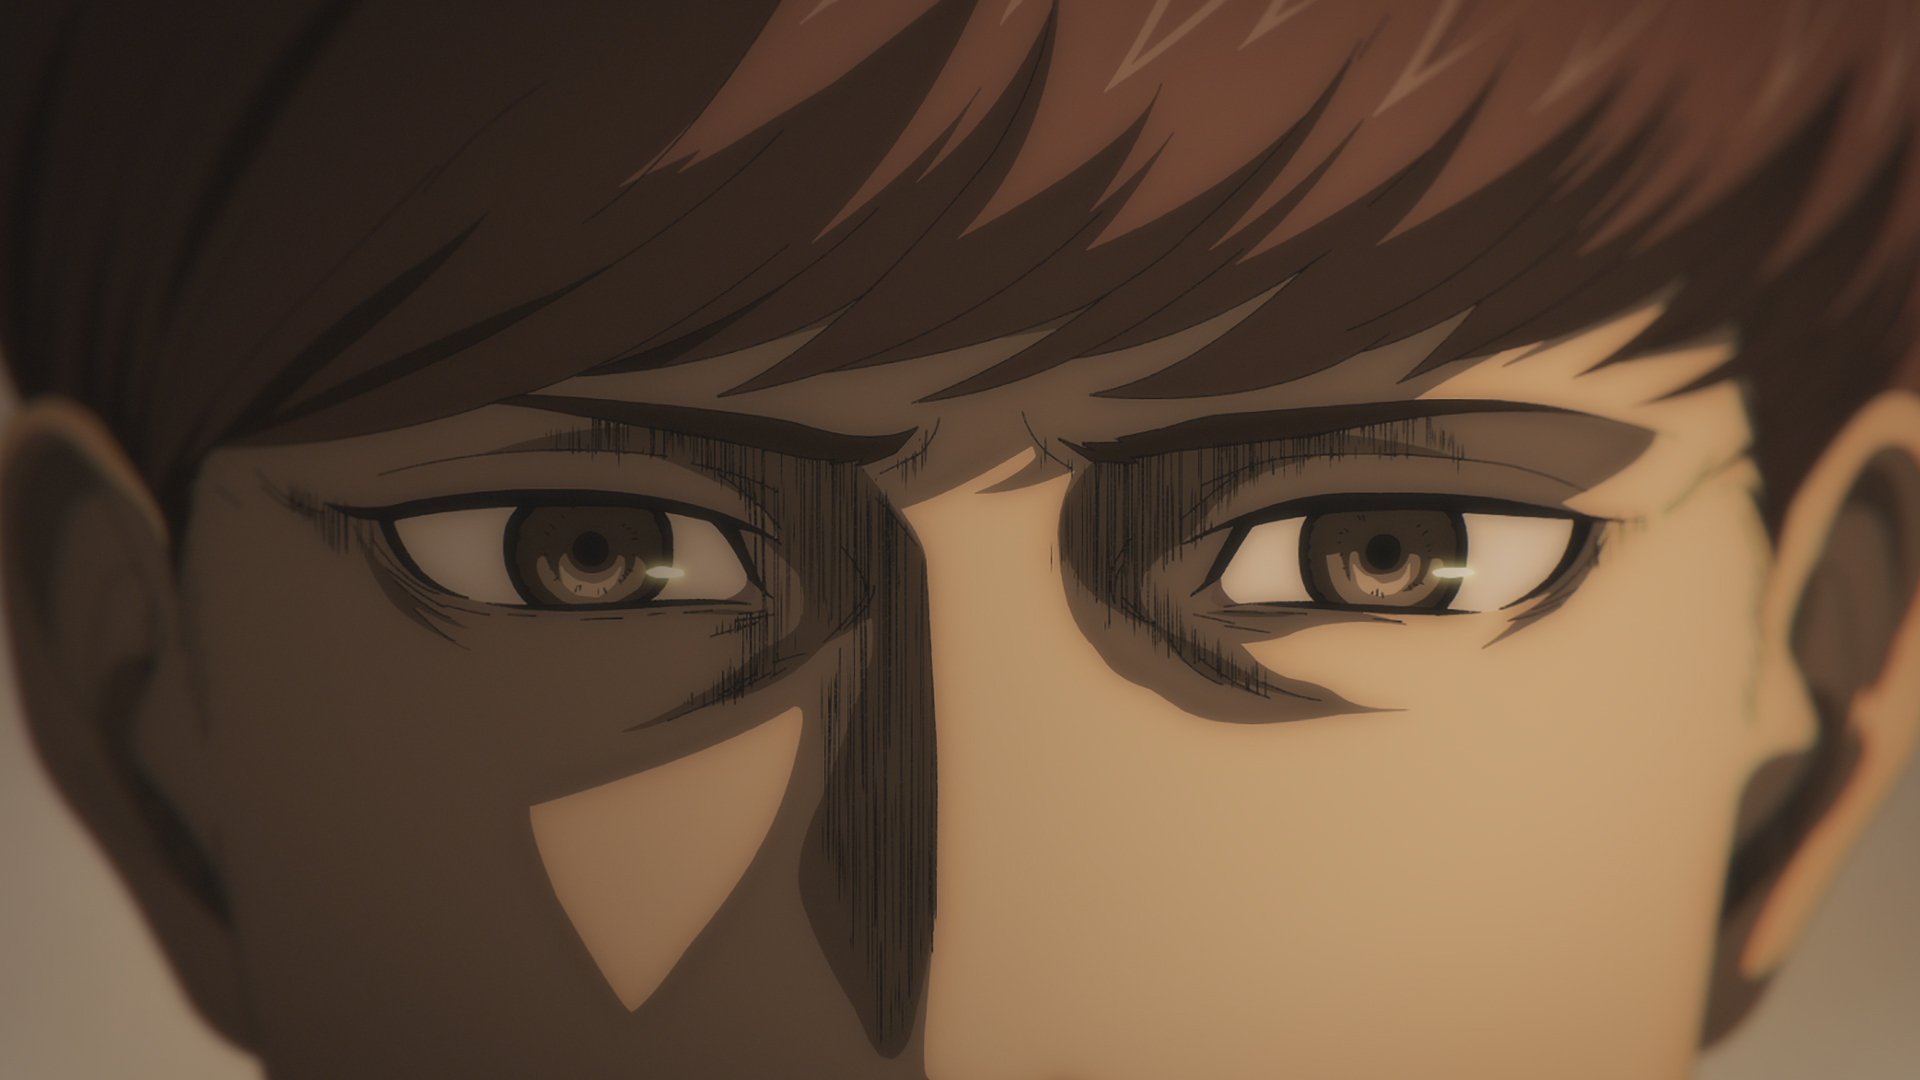 A close-up of Floch Forster in 'Attack on Titan' Season 4 Part 1.